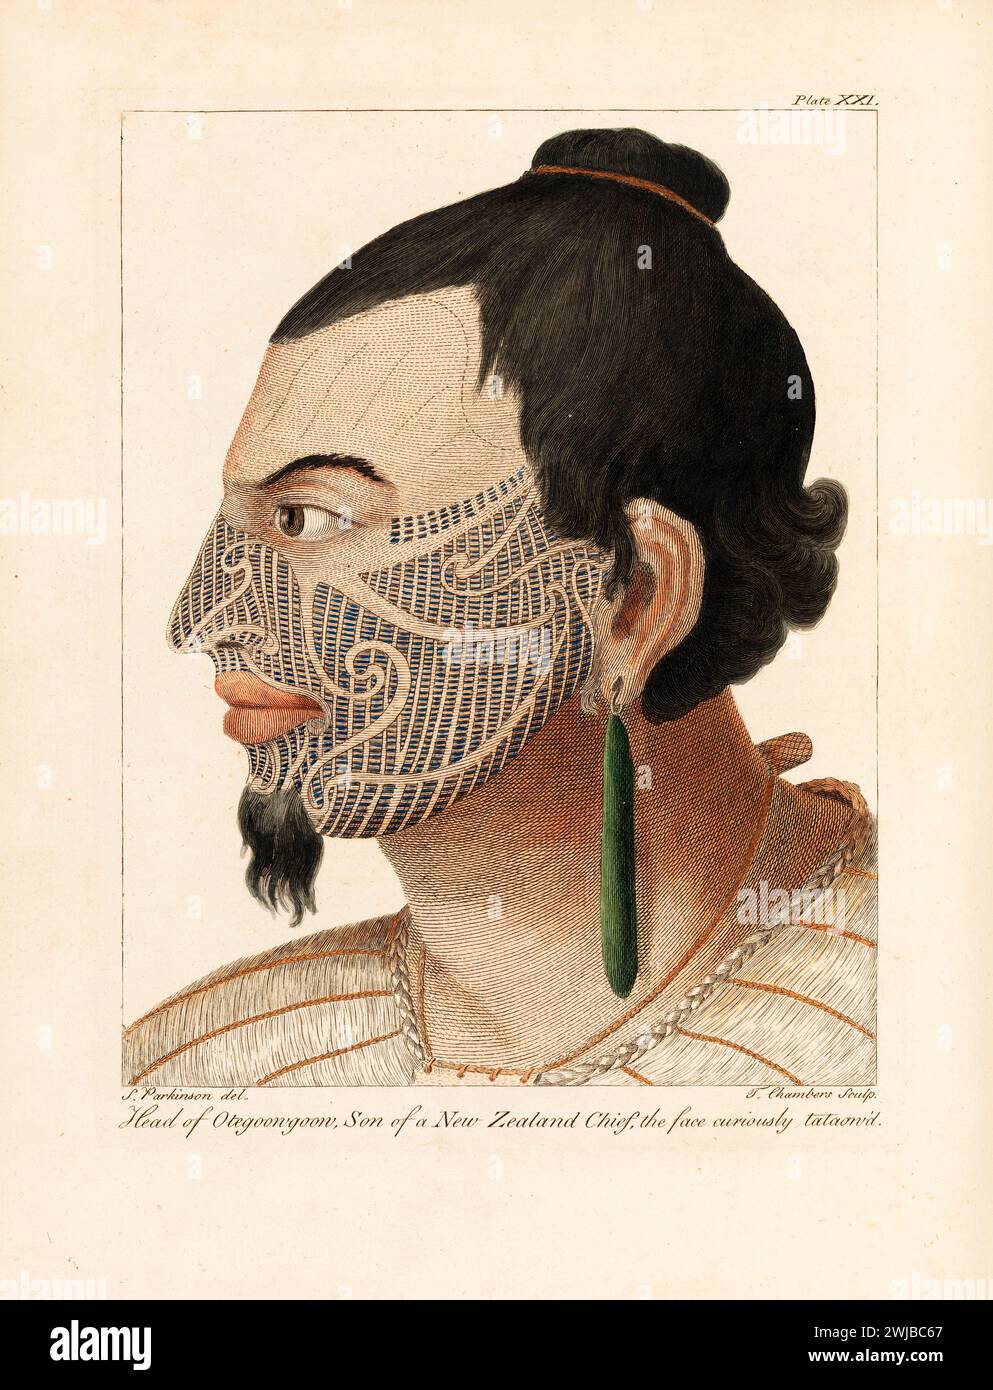 'Head of Otegoongoon, son of a New Zealand chief, the face curiously tataow'd'. Engraving From “A journal of a voyage to the South Seas : in His Majesty's ship, the Endeavour” from the papers of Sydney Parkinson, embellished with views and designs, delineated by the Author, and engraved by capital artists.  1773 Stock Photo